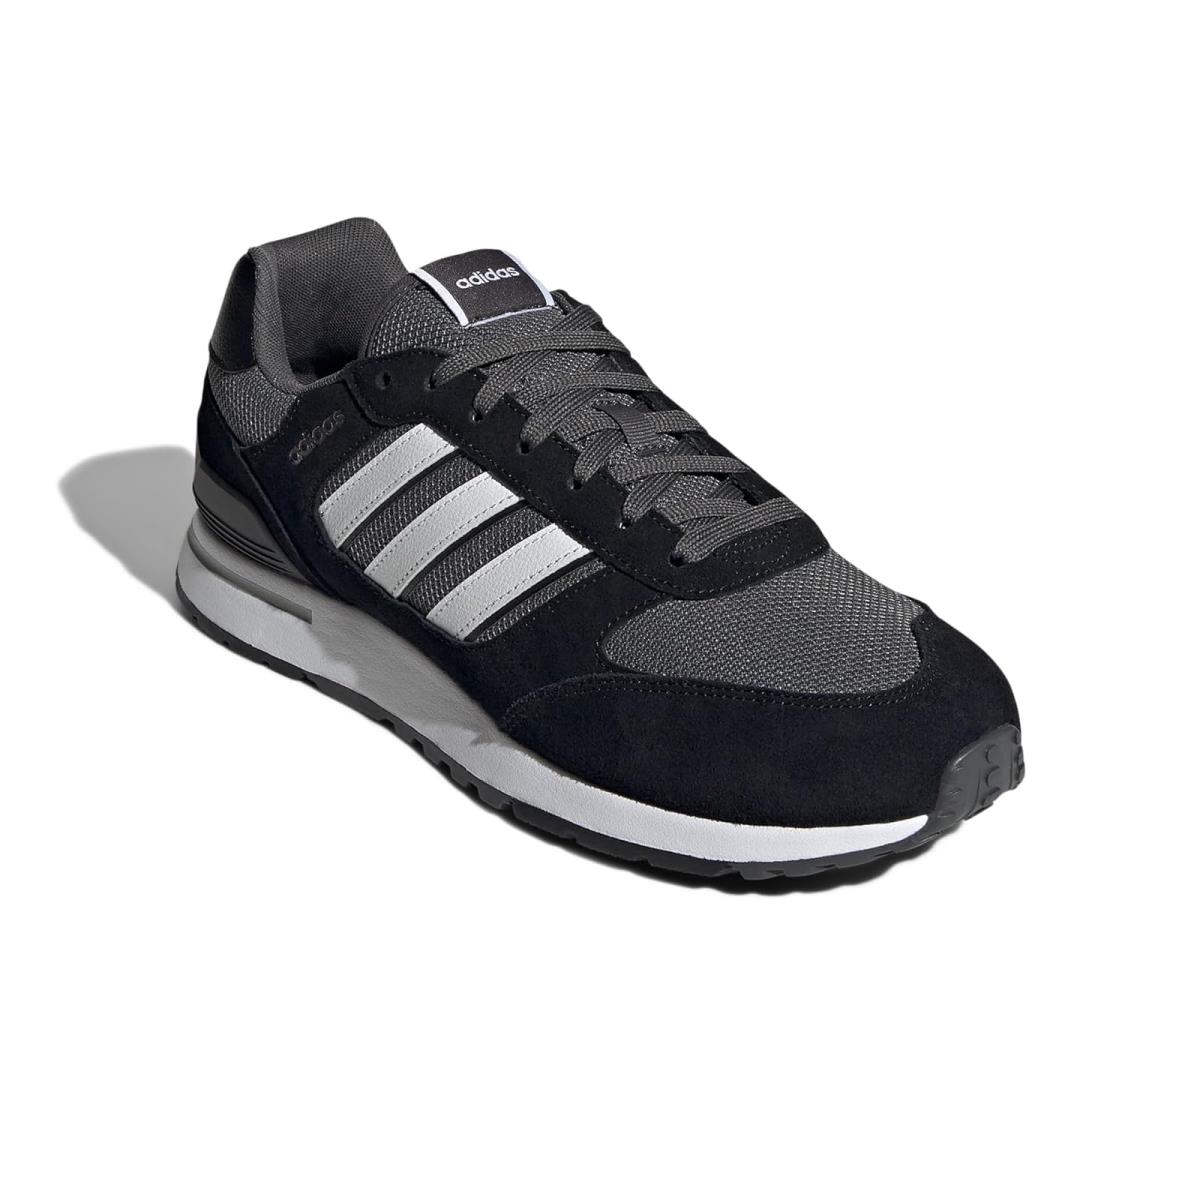 Man`s Sneakers Athletic Shoes Adidas Running Run 80s Black/White/Grey